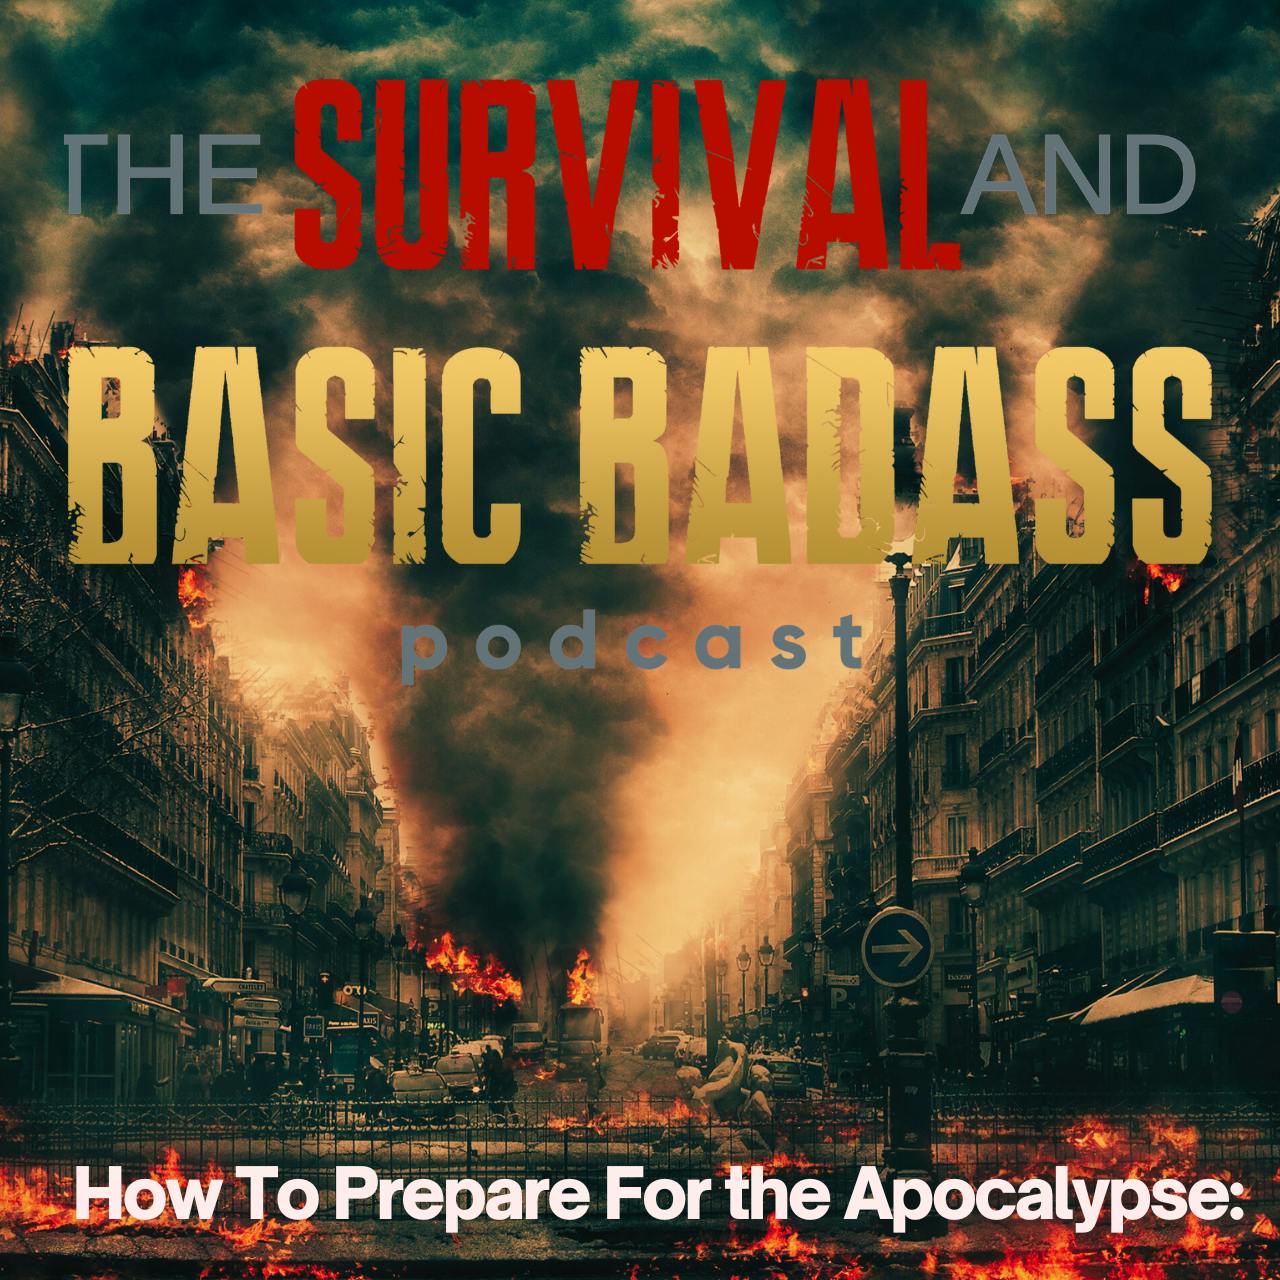 How To Prepare For The Apocalypse